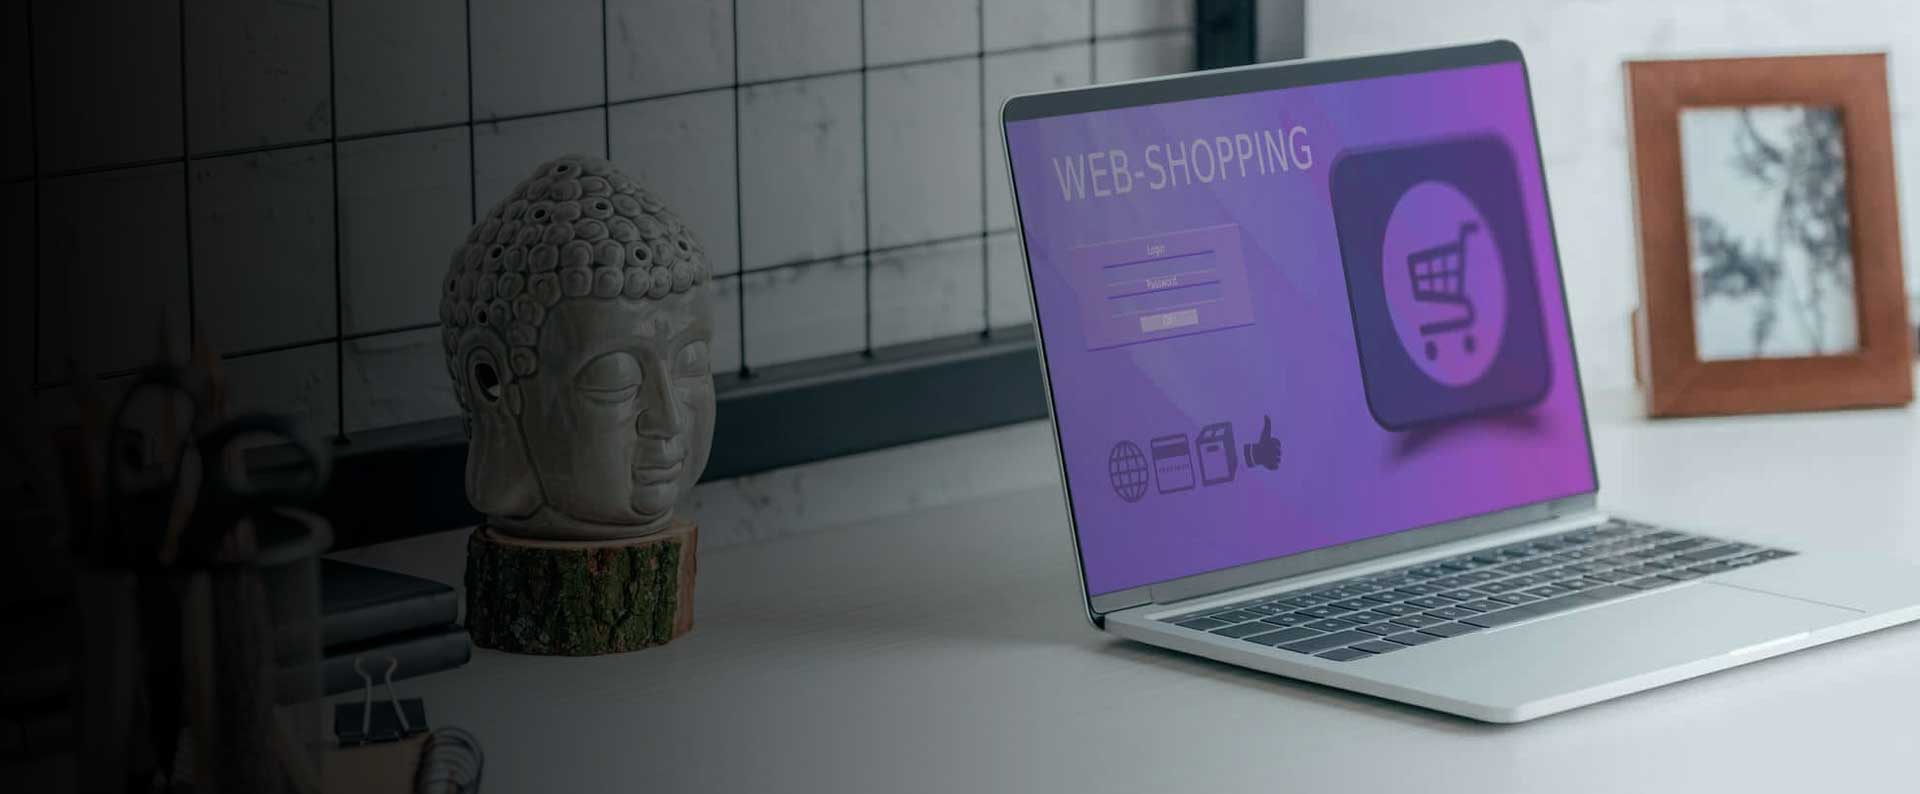 Making Things Easy With Ecommerce Website Design